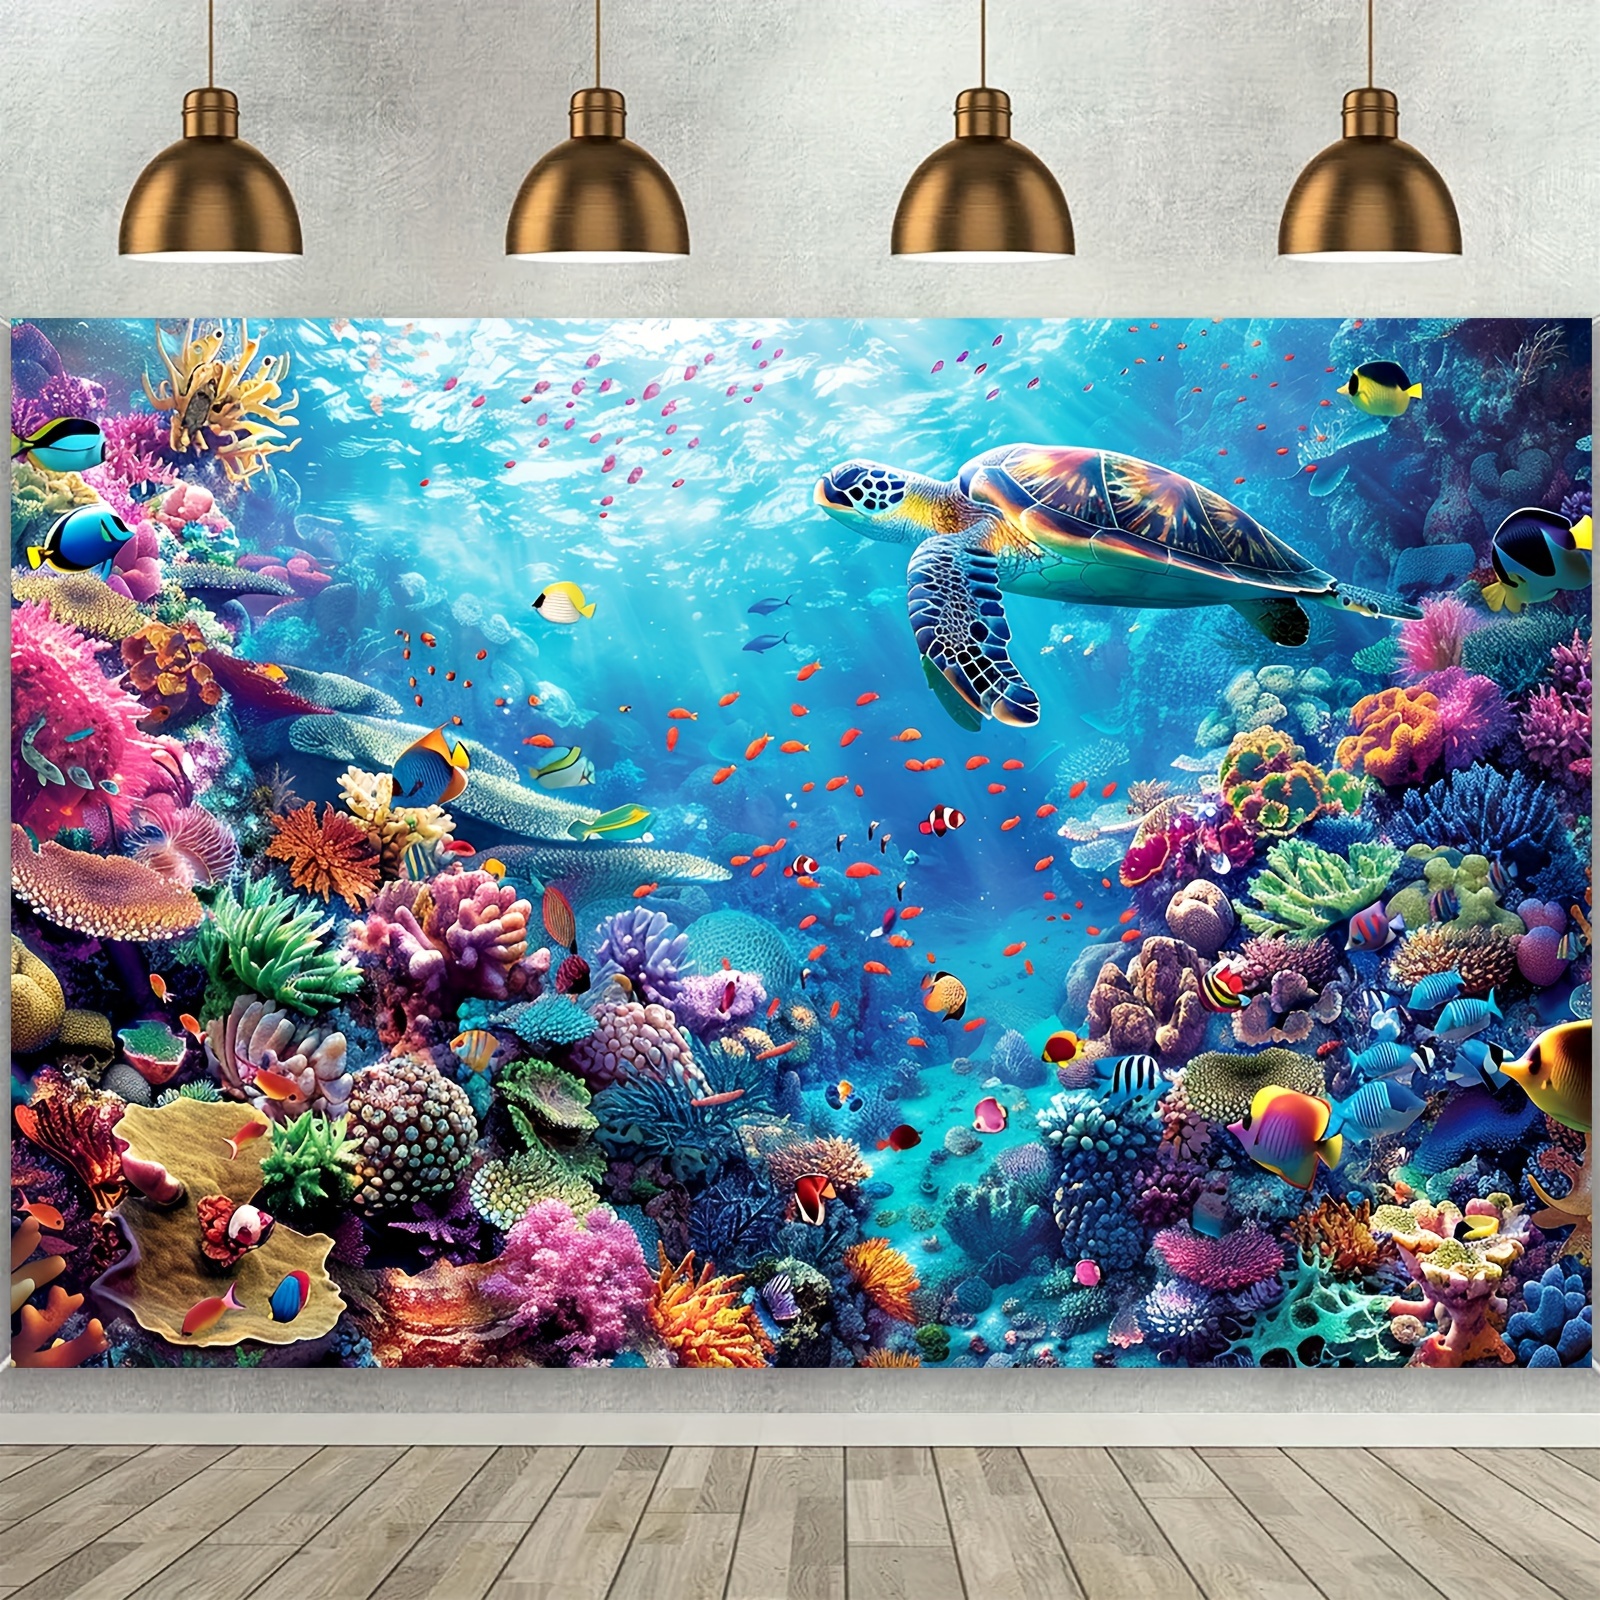 

1pc Under Sea Seabed World Backdrop Underwater Scene Colorful Marine Coral Fishes Aquarium Photography Background Diving Holiday Photo Studio Props Party Decor Supplies, Home Decor Supplies